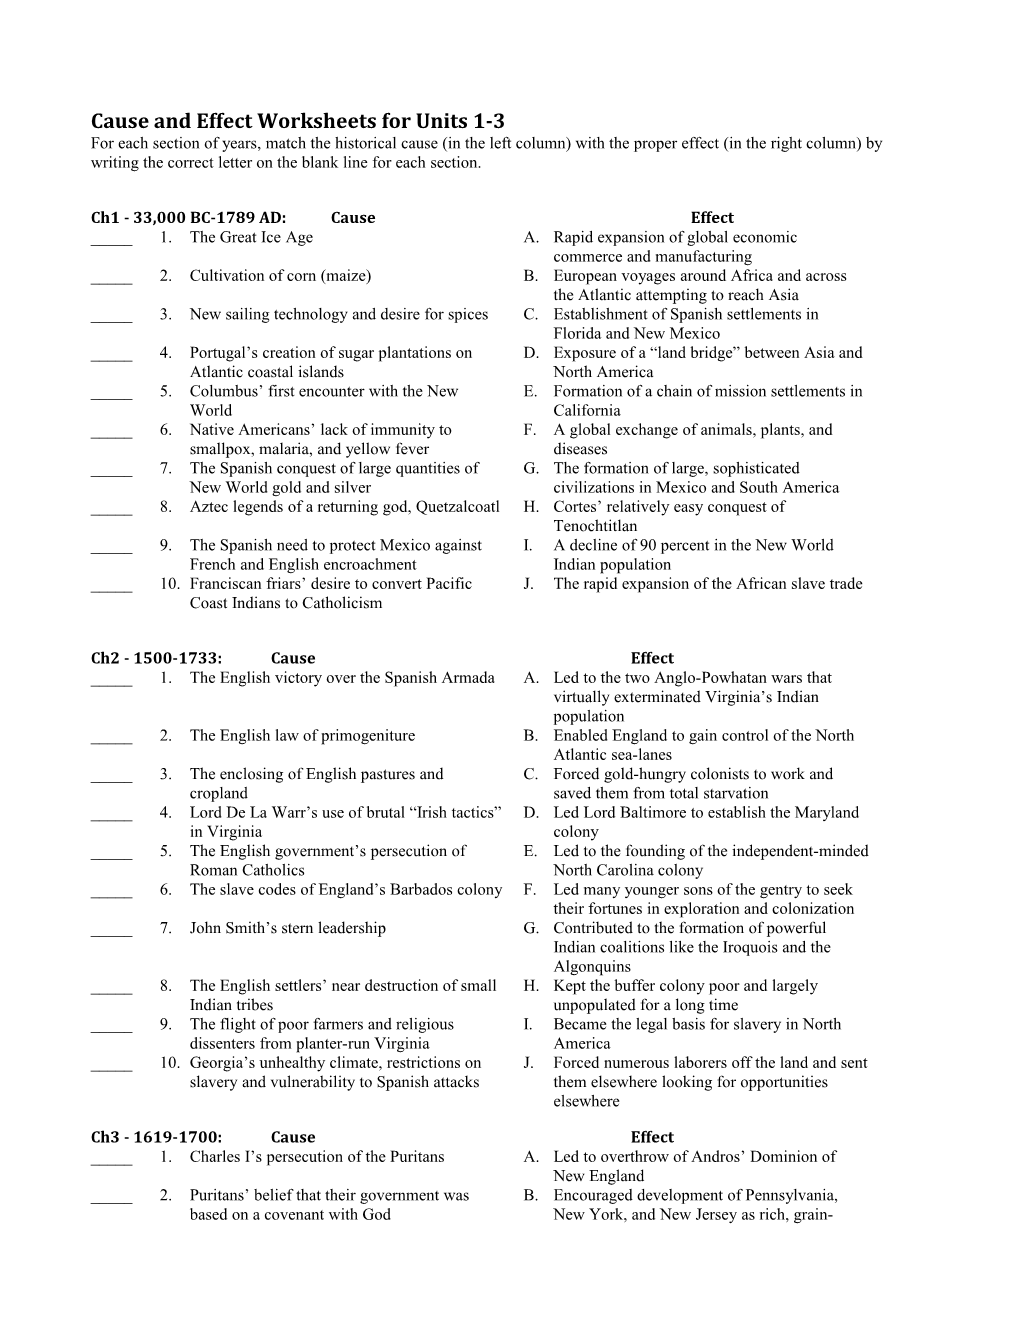 Cause and Effect Worksheets for Units 1-3